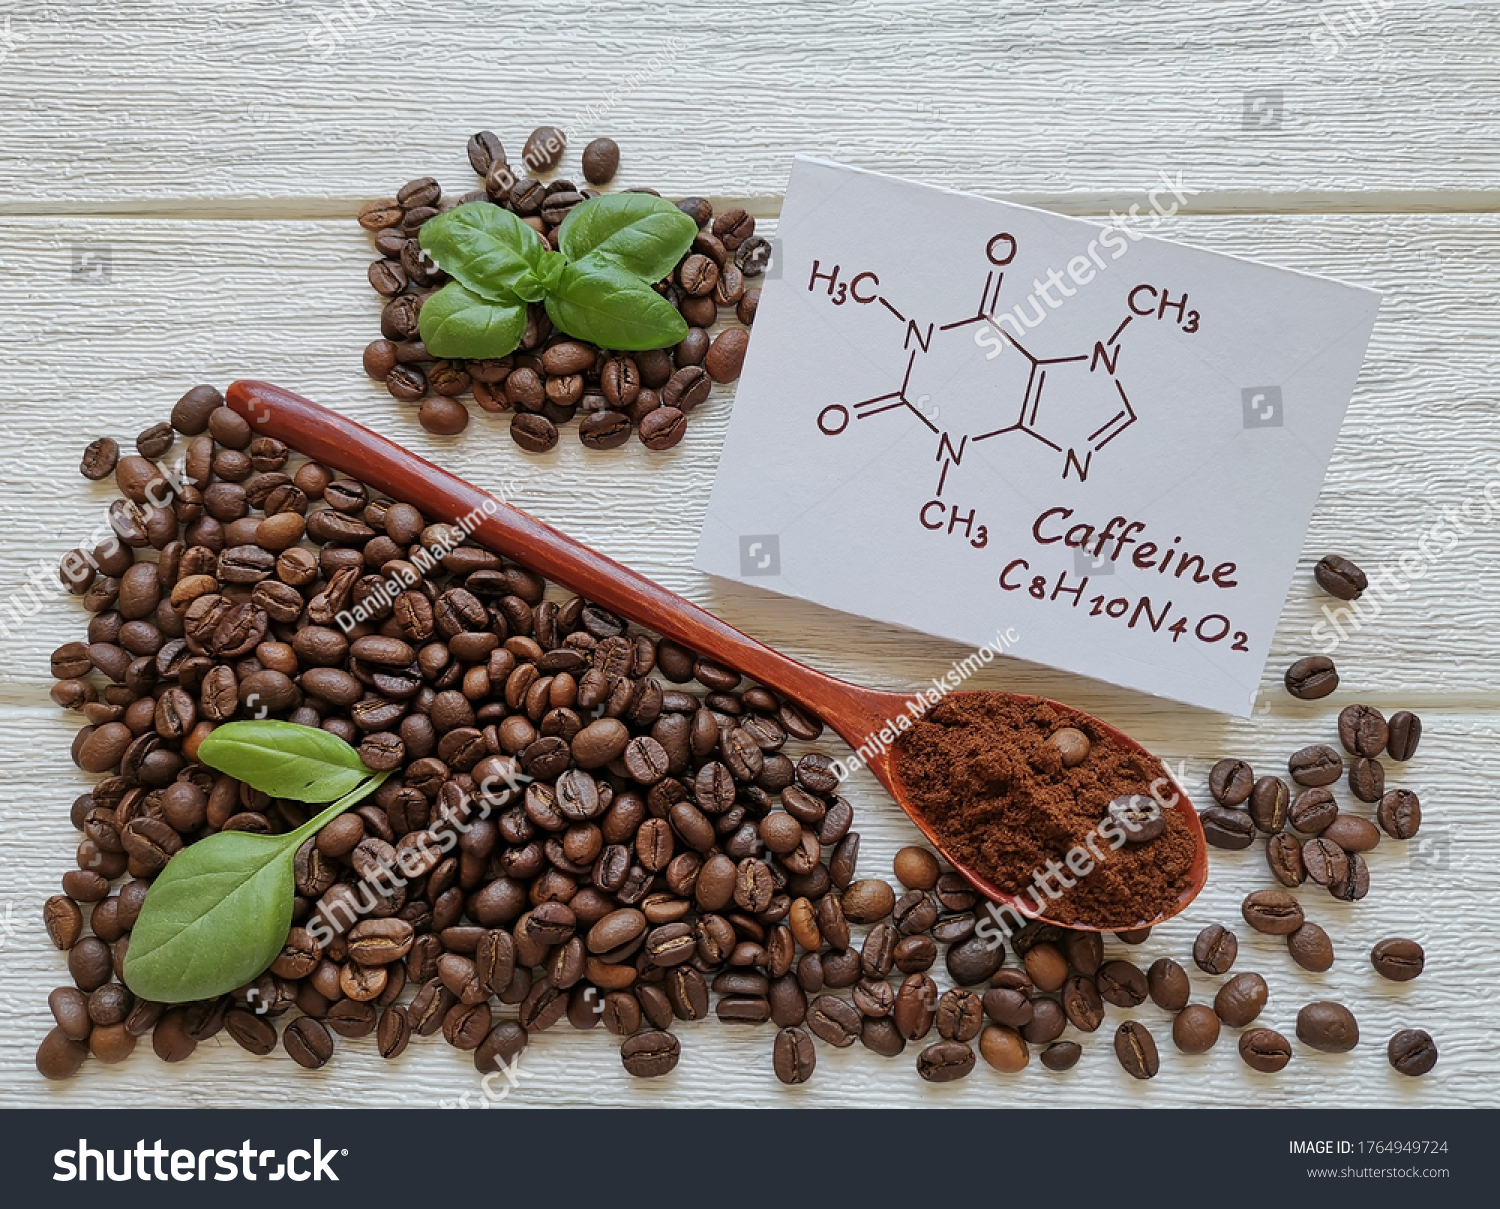 Structural chemical formula of caffeine molecule with roasted coffee beans and wooden spoon filled with coffee powder. Caffeine is a central nervous system stimulant, psychoactive drug molecule. #1764949724